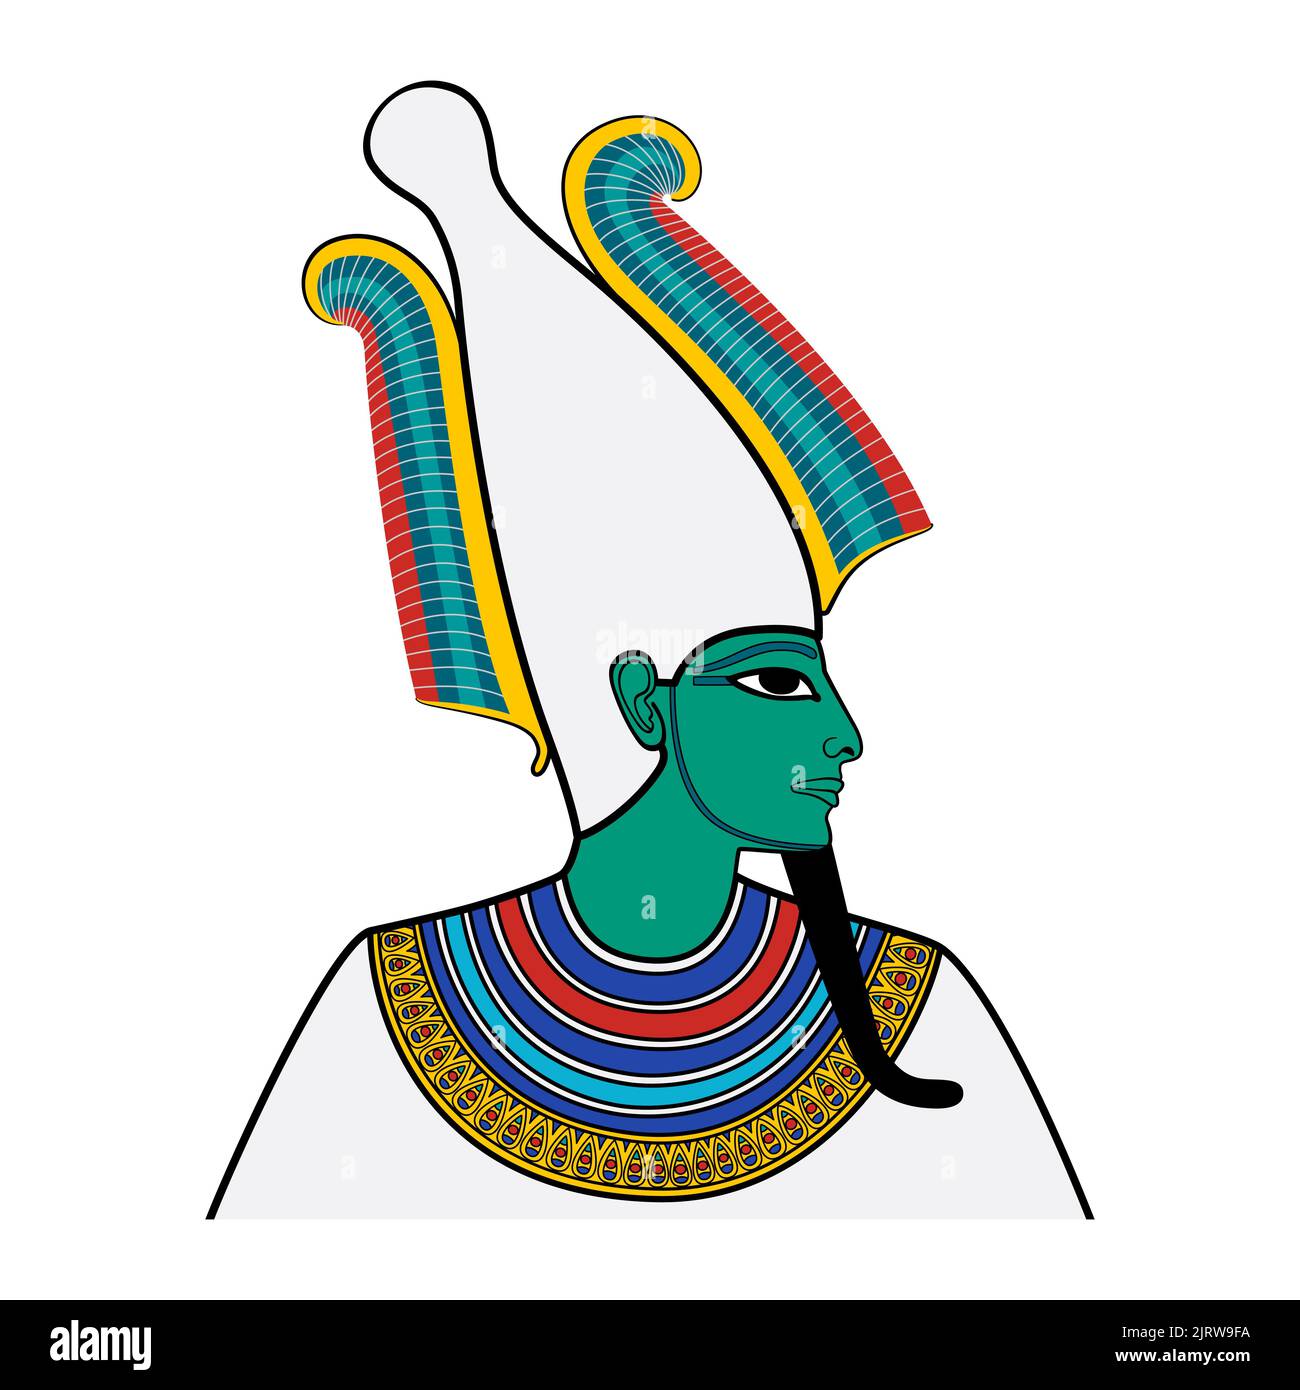 Osiris, portrait of the god of afterlife, dead and resurrection in ancient Egypt. Depicted with greenish turquoise skin, pharaoh beard and atef crown. Stock Photo